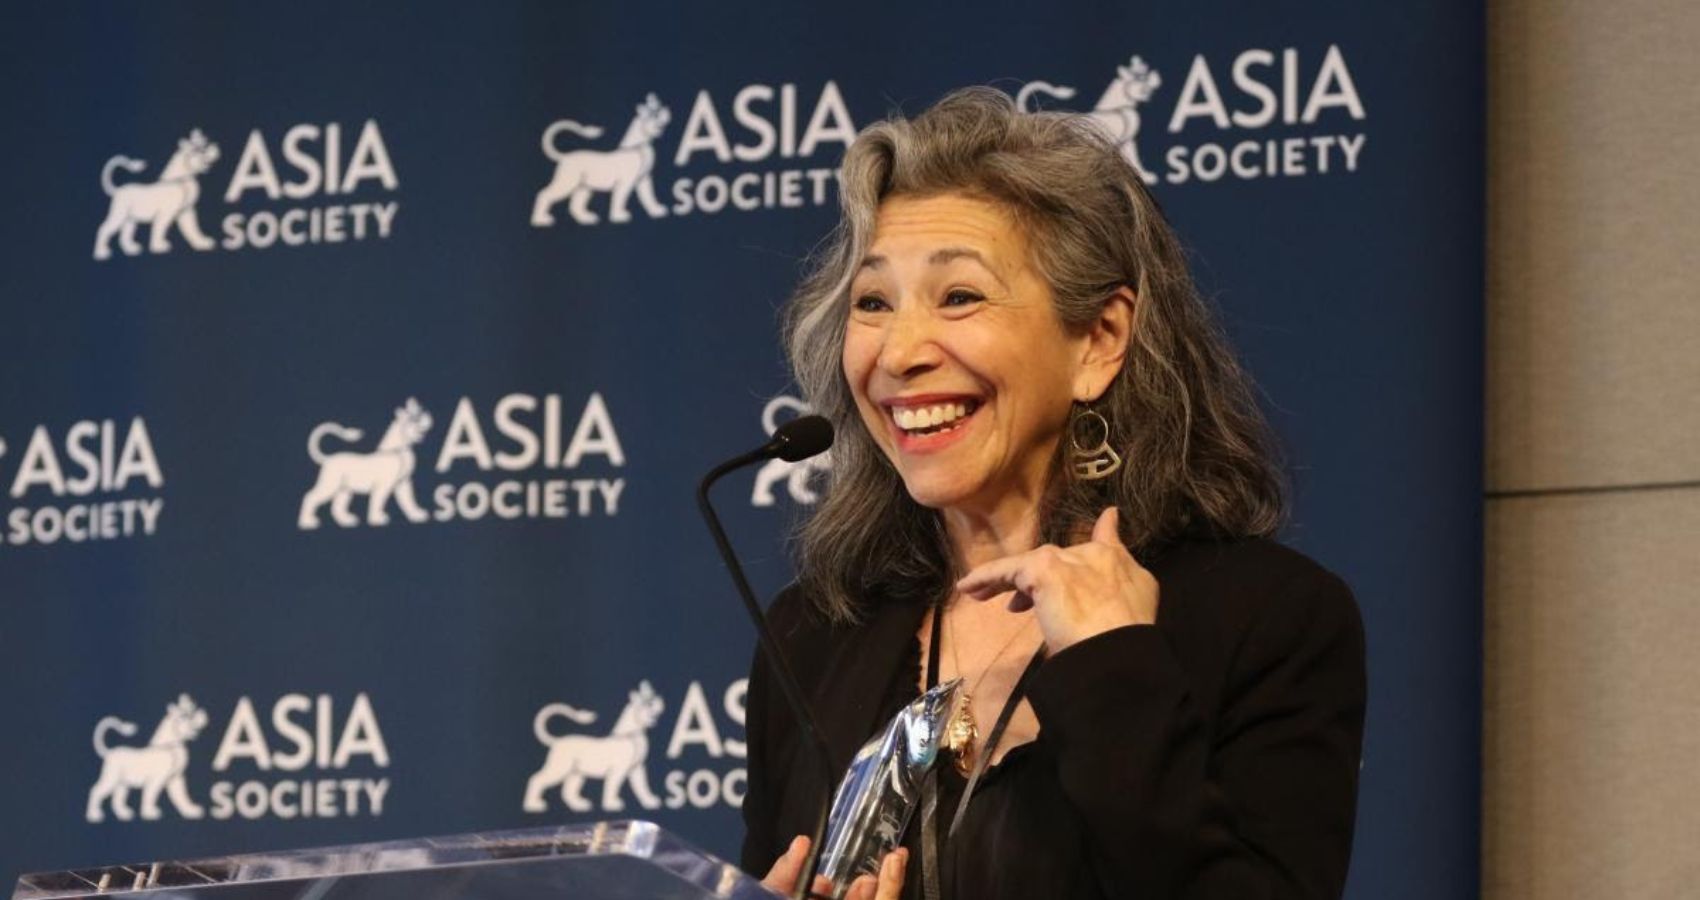 Asia Society New York Hosts the 16th Annual Global Talent Symposium